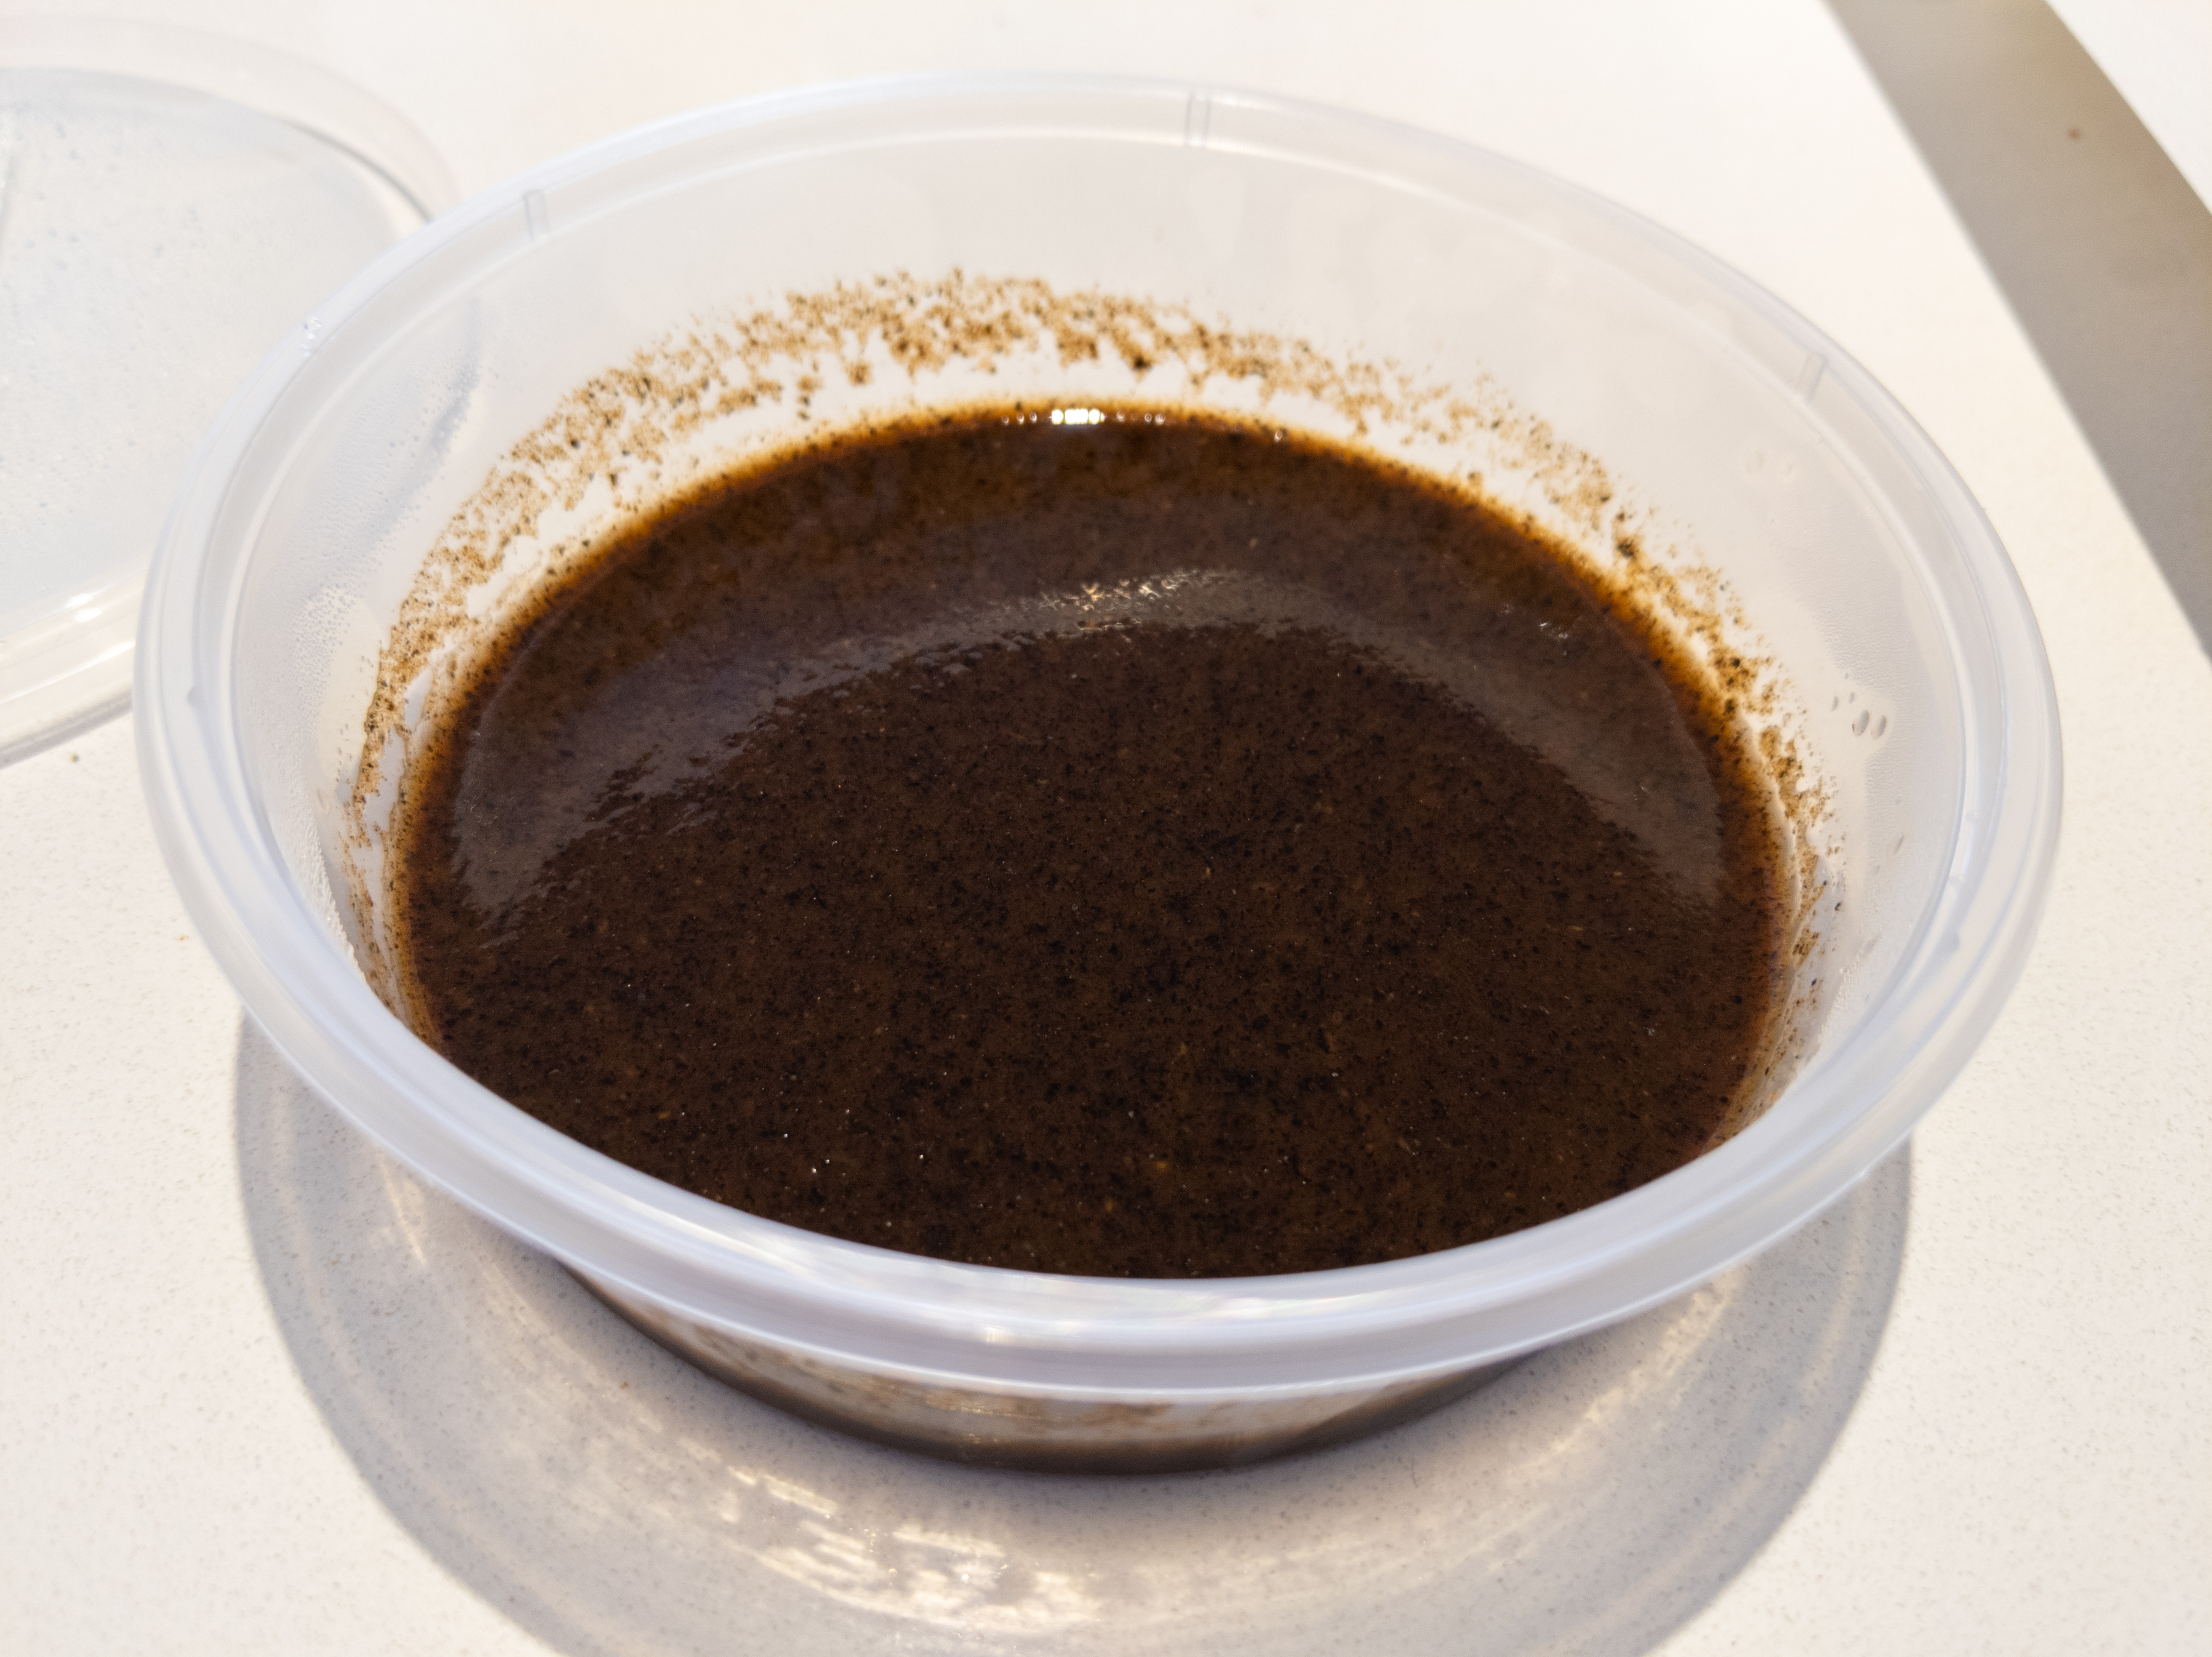 A small container filled with dark red, thick liquid, with black flecks throughout